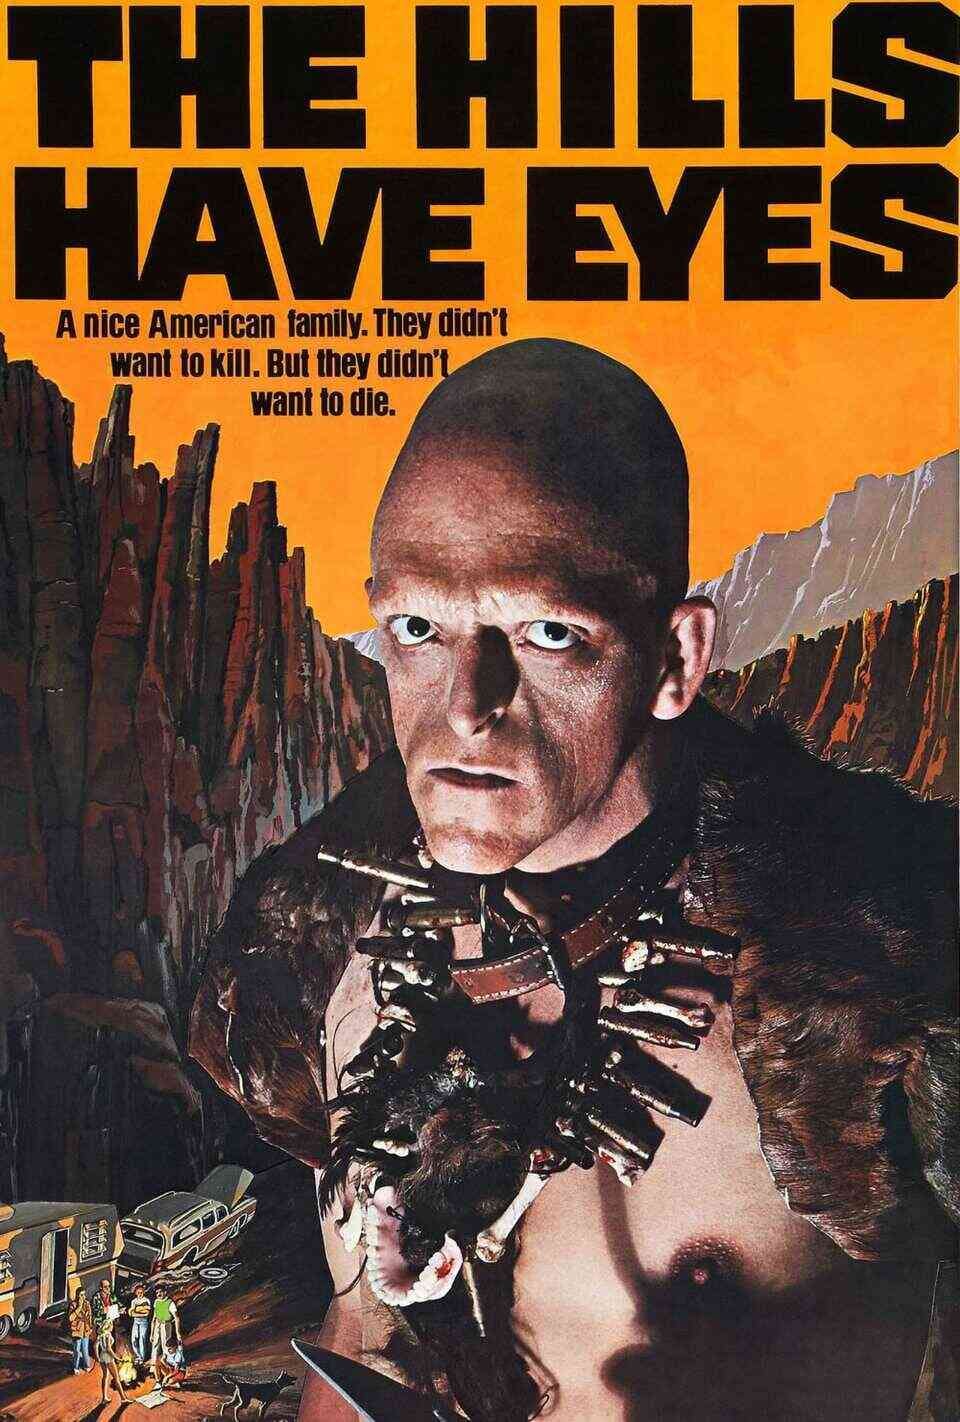 Read The Hills Have Eyes screenplay.